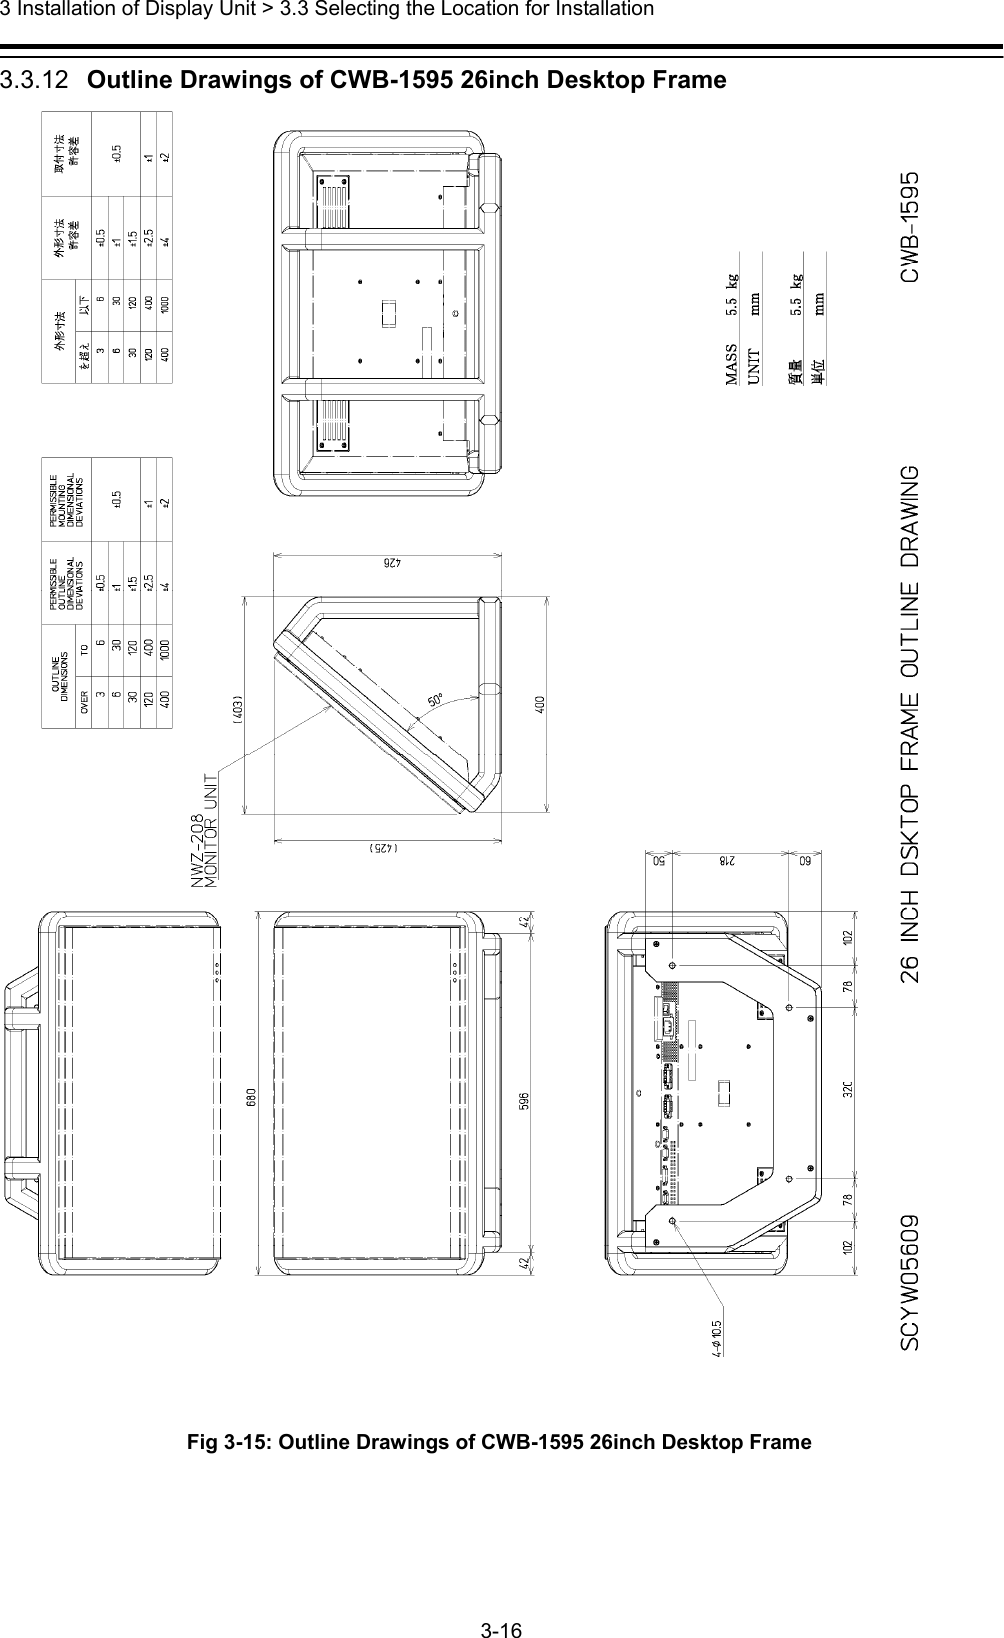  3 Installation of Display Unit &gt; 3.3 Selecting the Location for Installation 3-16  3.3.12   Outline Drawings of CWB-1595 26inch Desktop Frame  Fig 3-15: Outline Drawings of CWB-1595 26inch Desktop Frame 